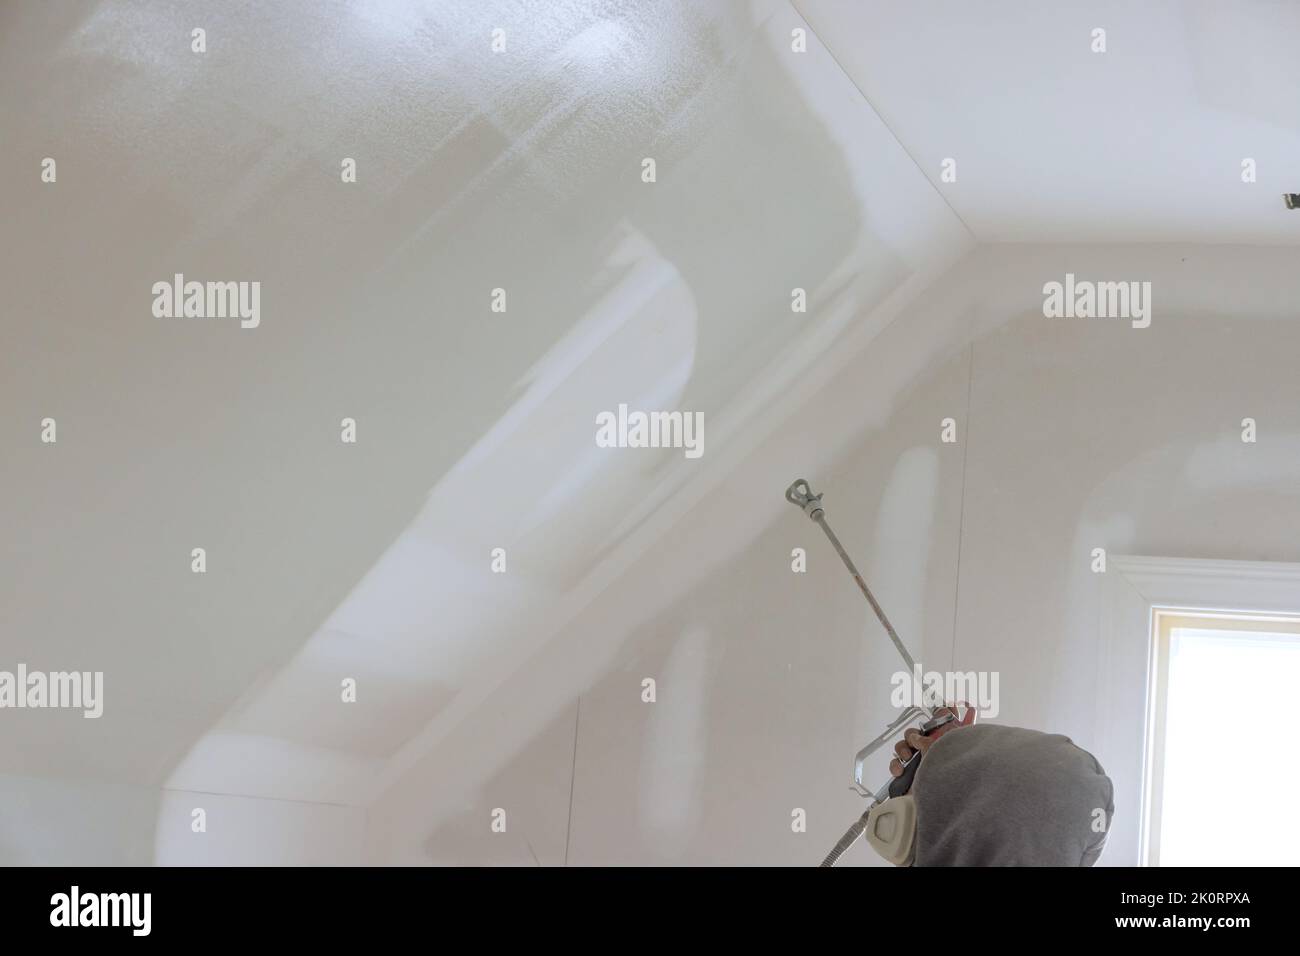 Using a spray gun and a primer, the worker paints the walls and ceilings using a spray gun that has a primer in it. Stock Photo